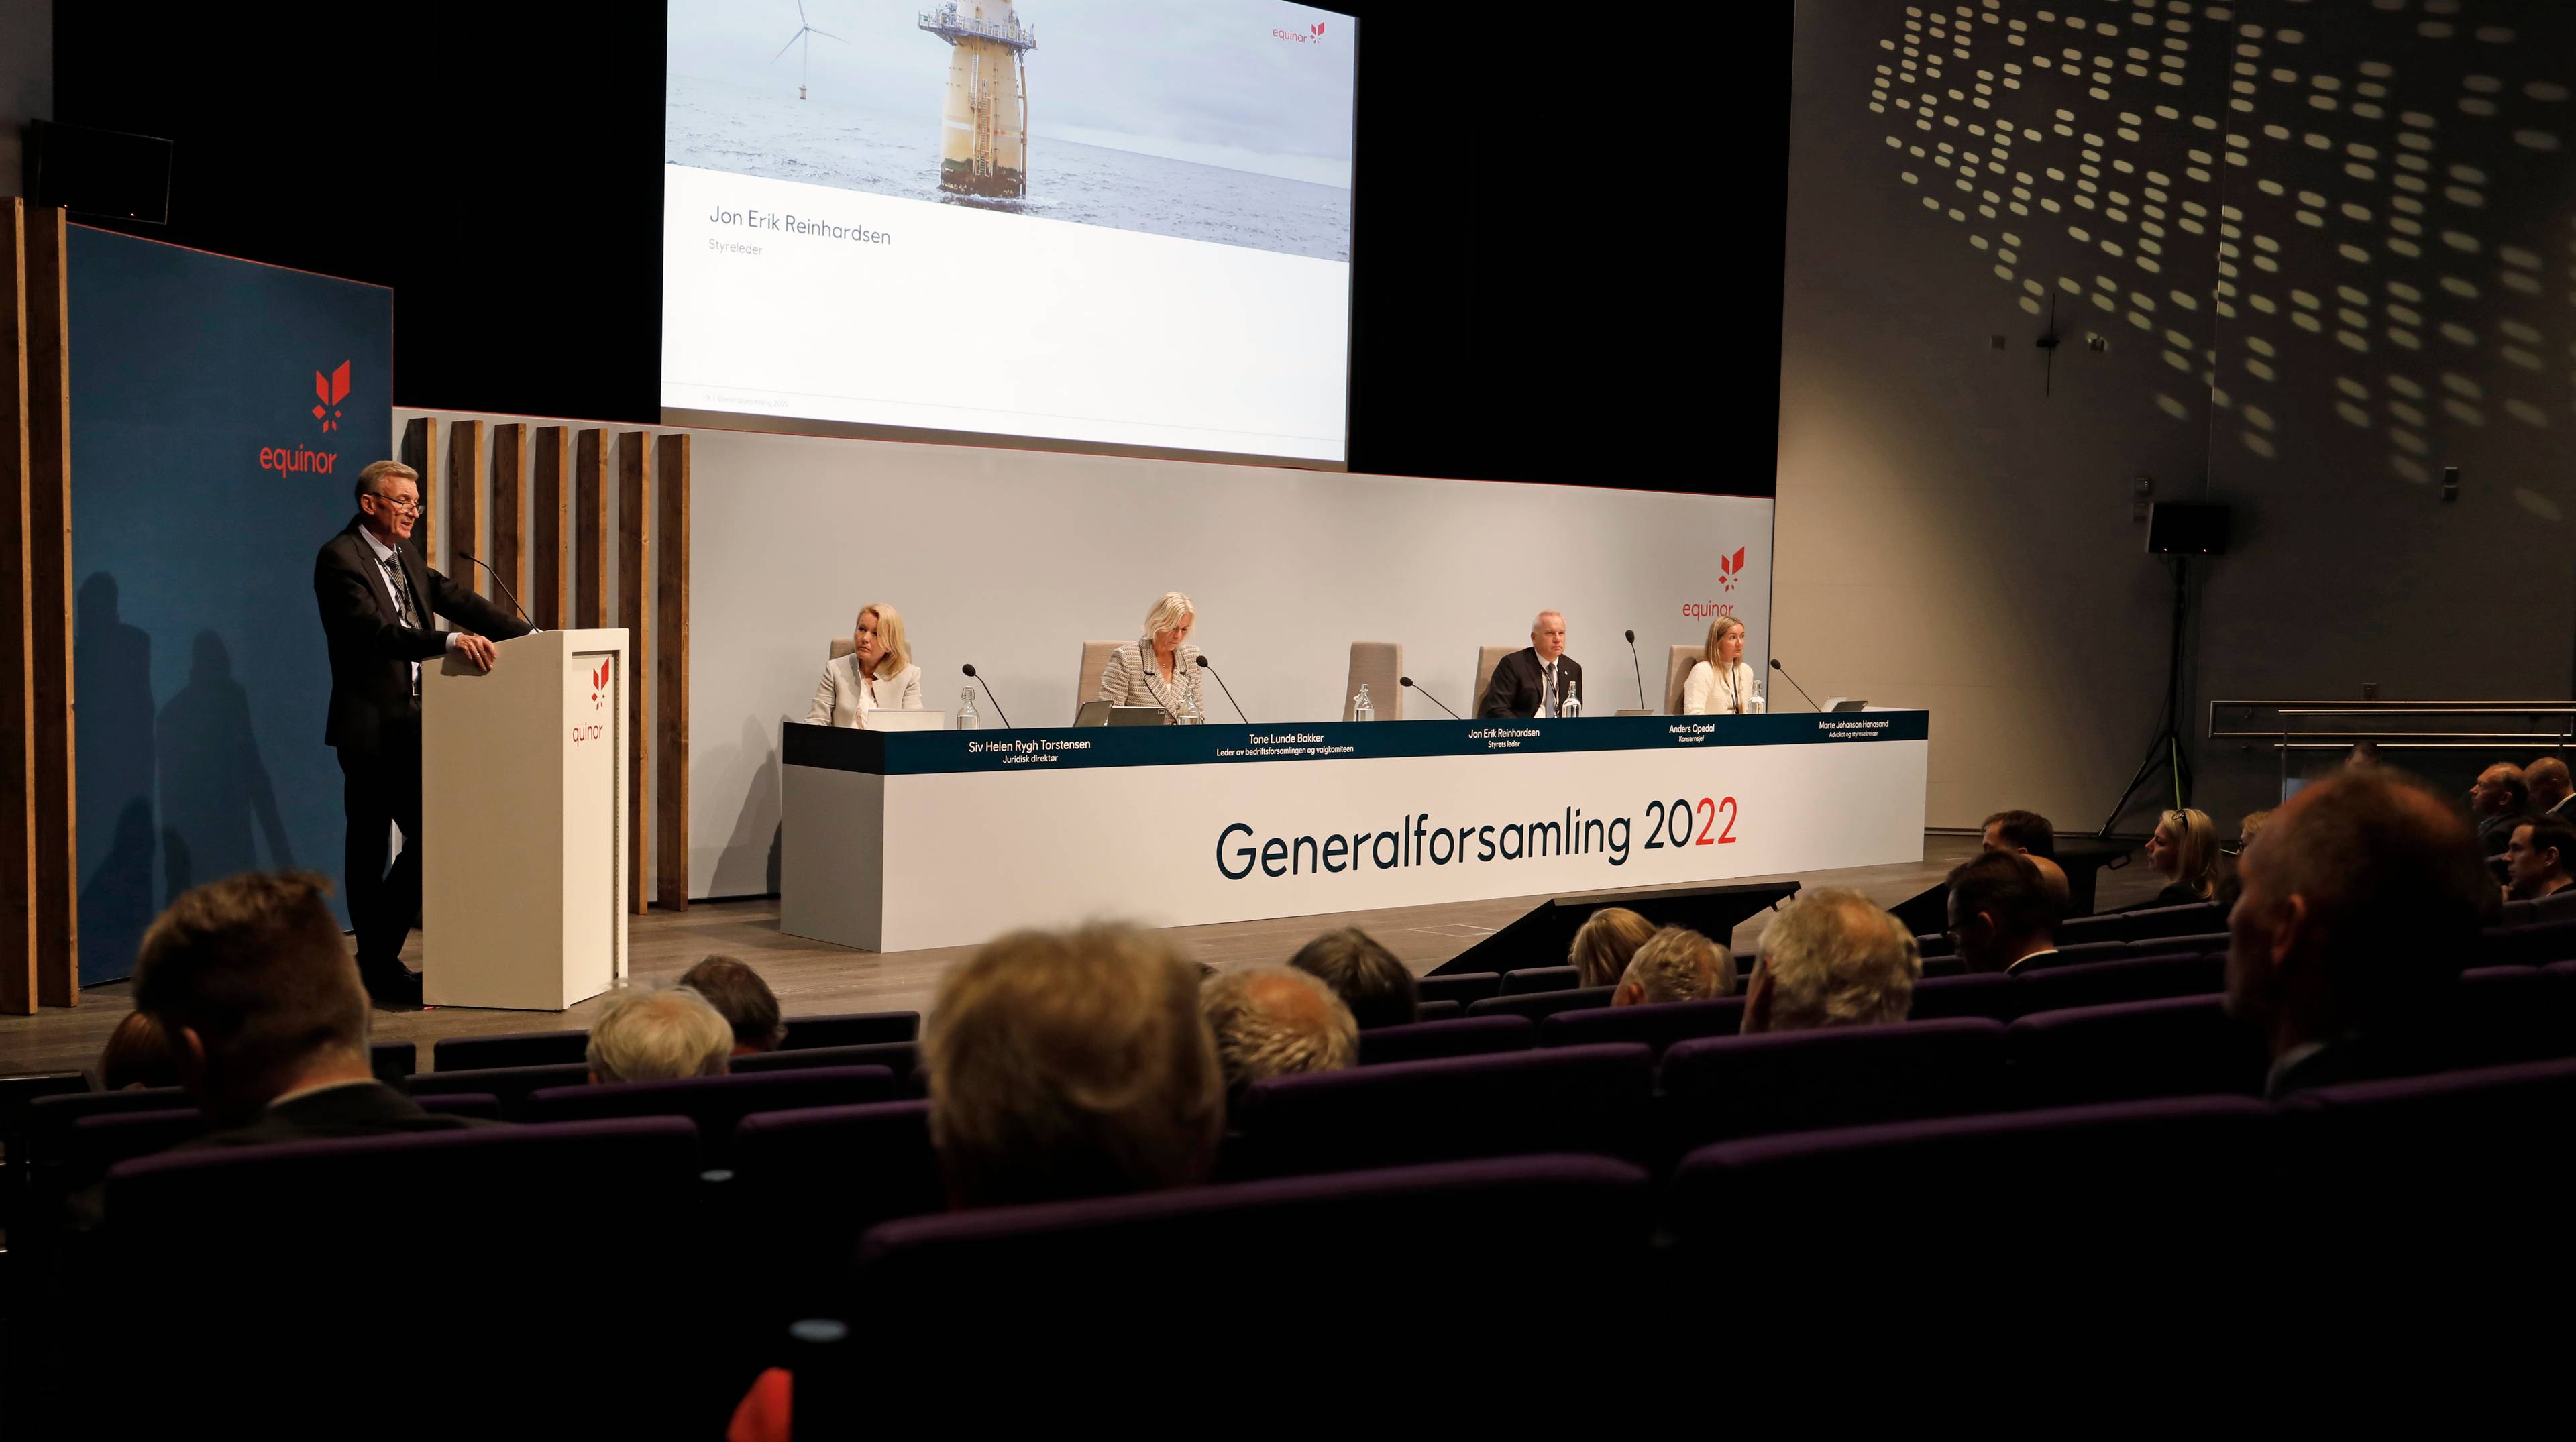 Equinor's annual general meeting 2022